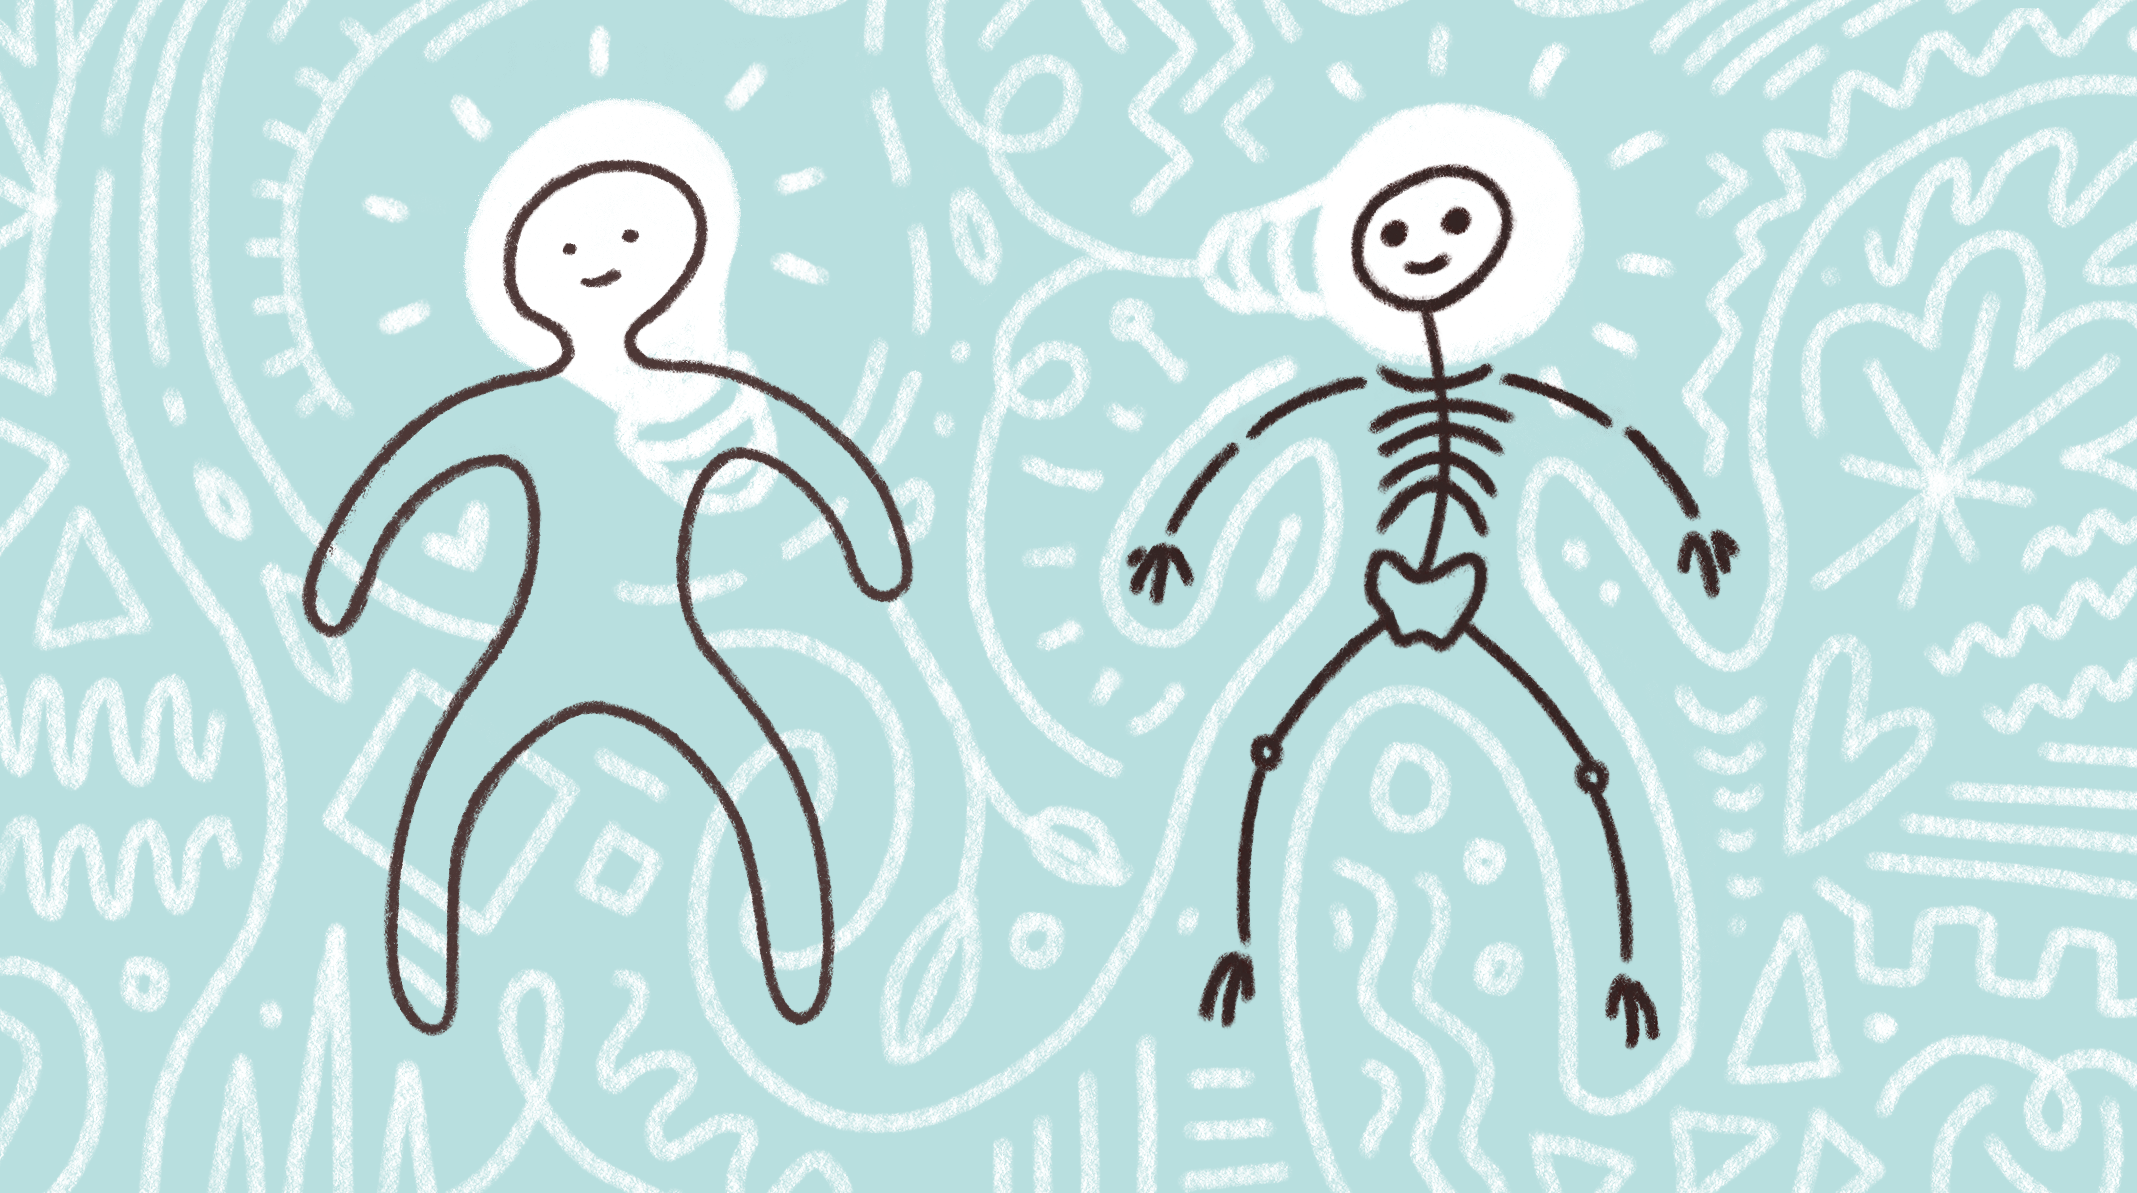 Illustration of a humanoid outline and skeleton side by side